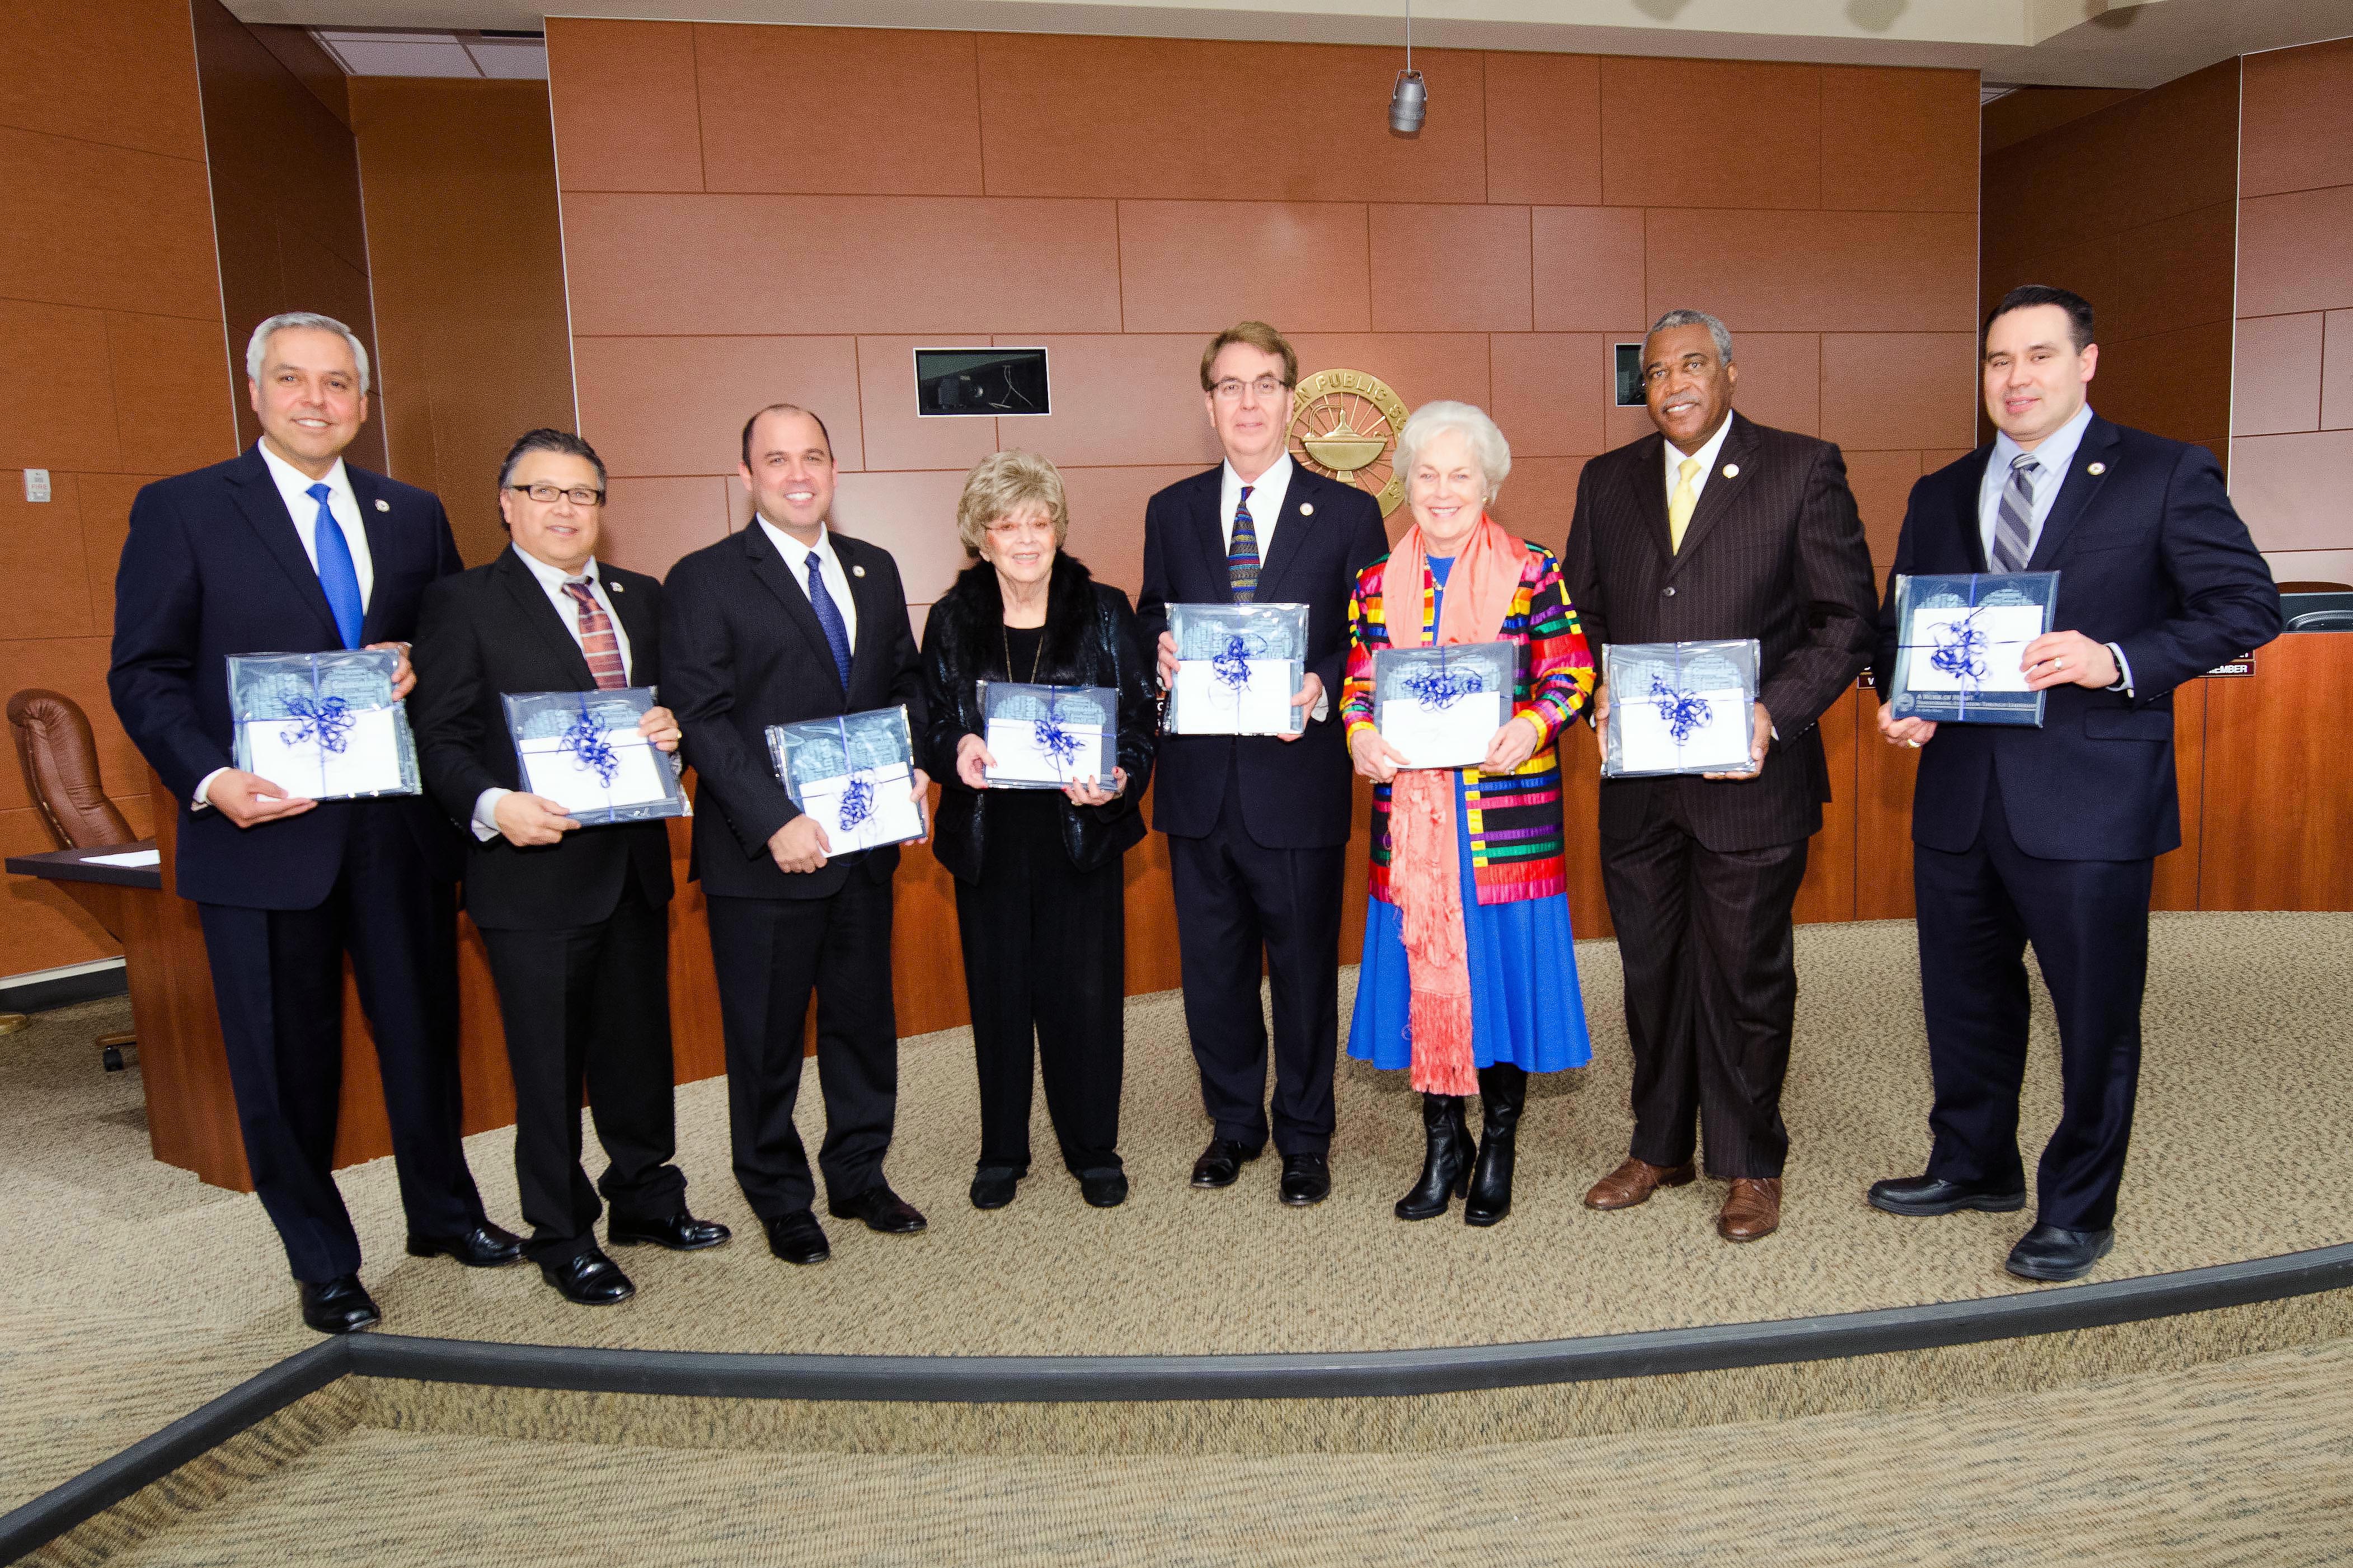 HCISD Board of Trustees chosen as an outstanding School Board in the 2015 H-E-B Excellence in Education Awards